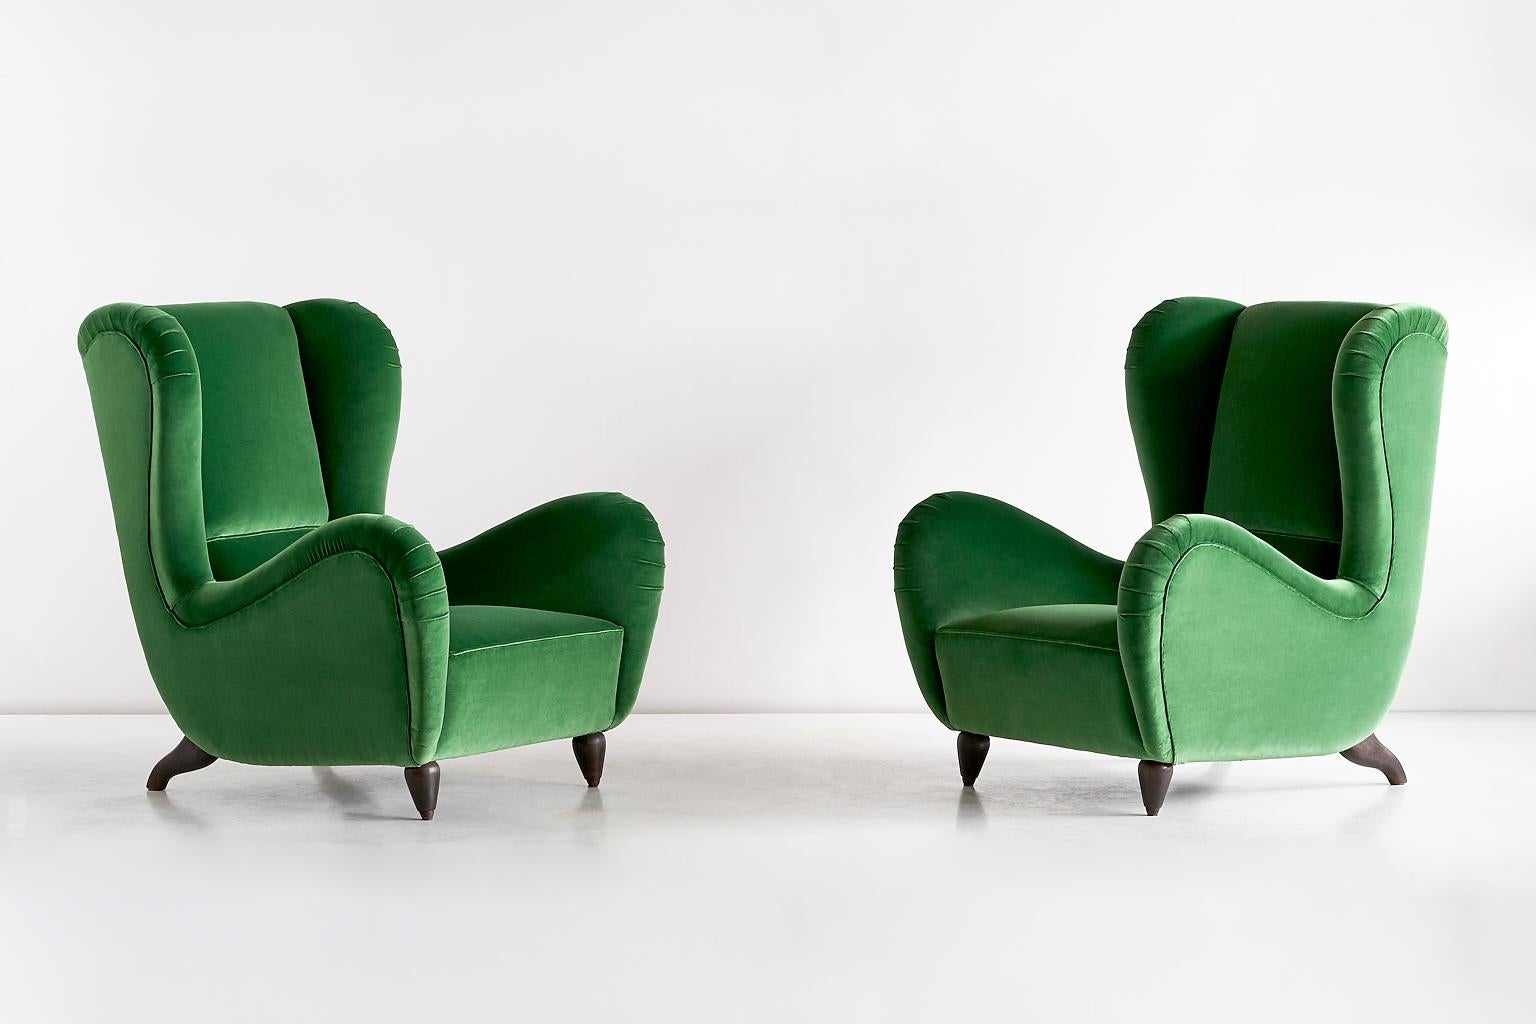 This sumptuous pair of armchairs was designed for a private residence in Milan and produced in the mid-1940s. The organically curved lines and sculptural wooden legs create a striking presence. The generous proportions, the high winged back and the